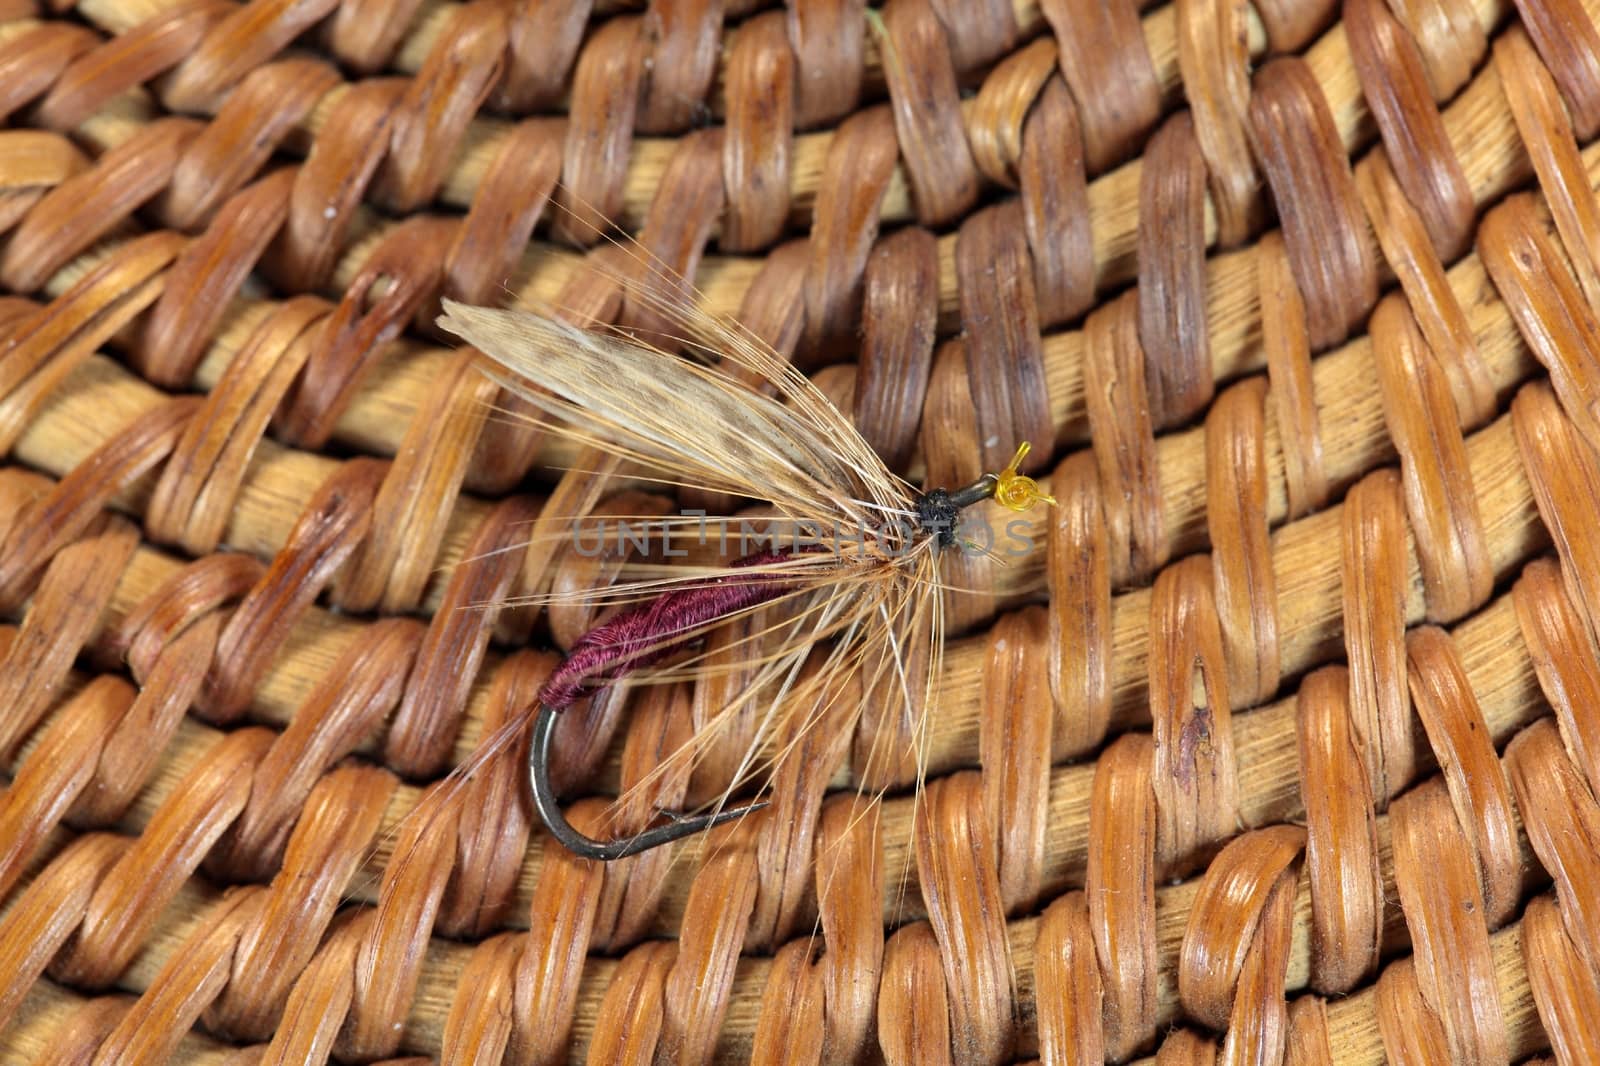 Macro photo of an artificial fly for fly fishing on a basketwork background.